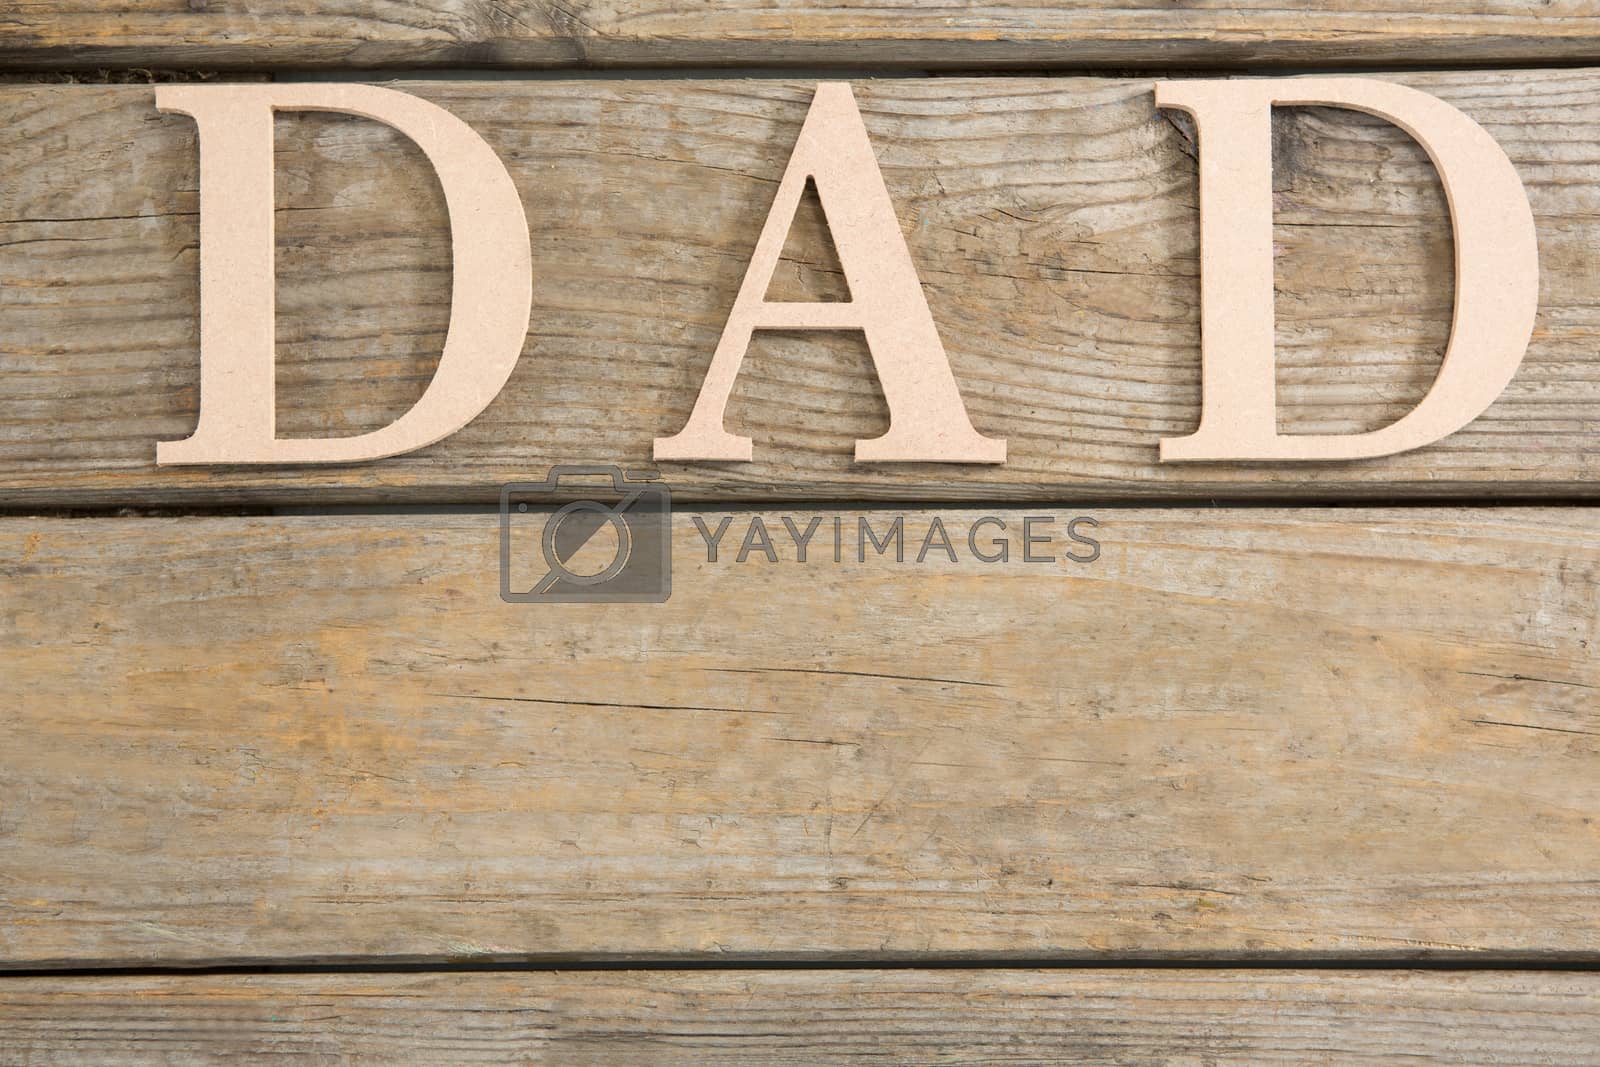 Royalty free image of Close up of dad text by Wavebreakmedia